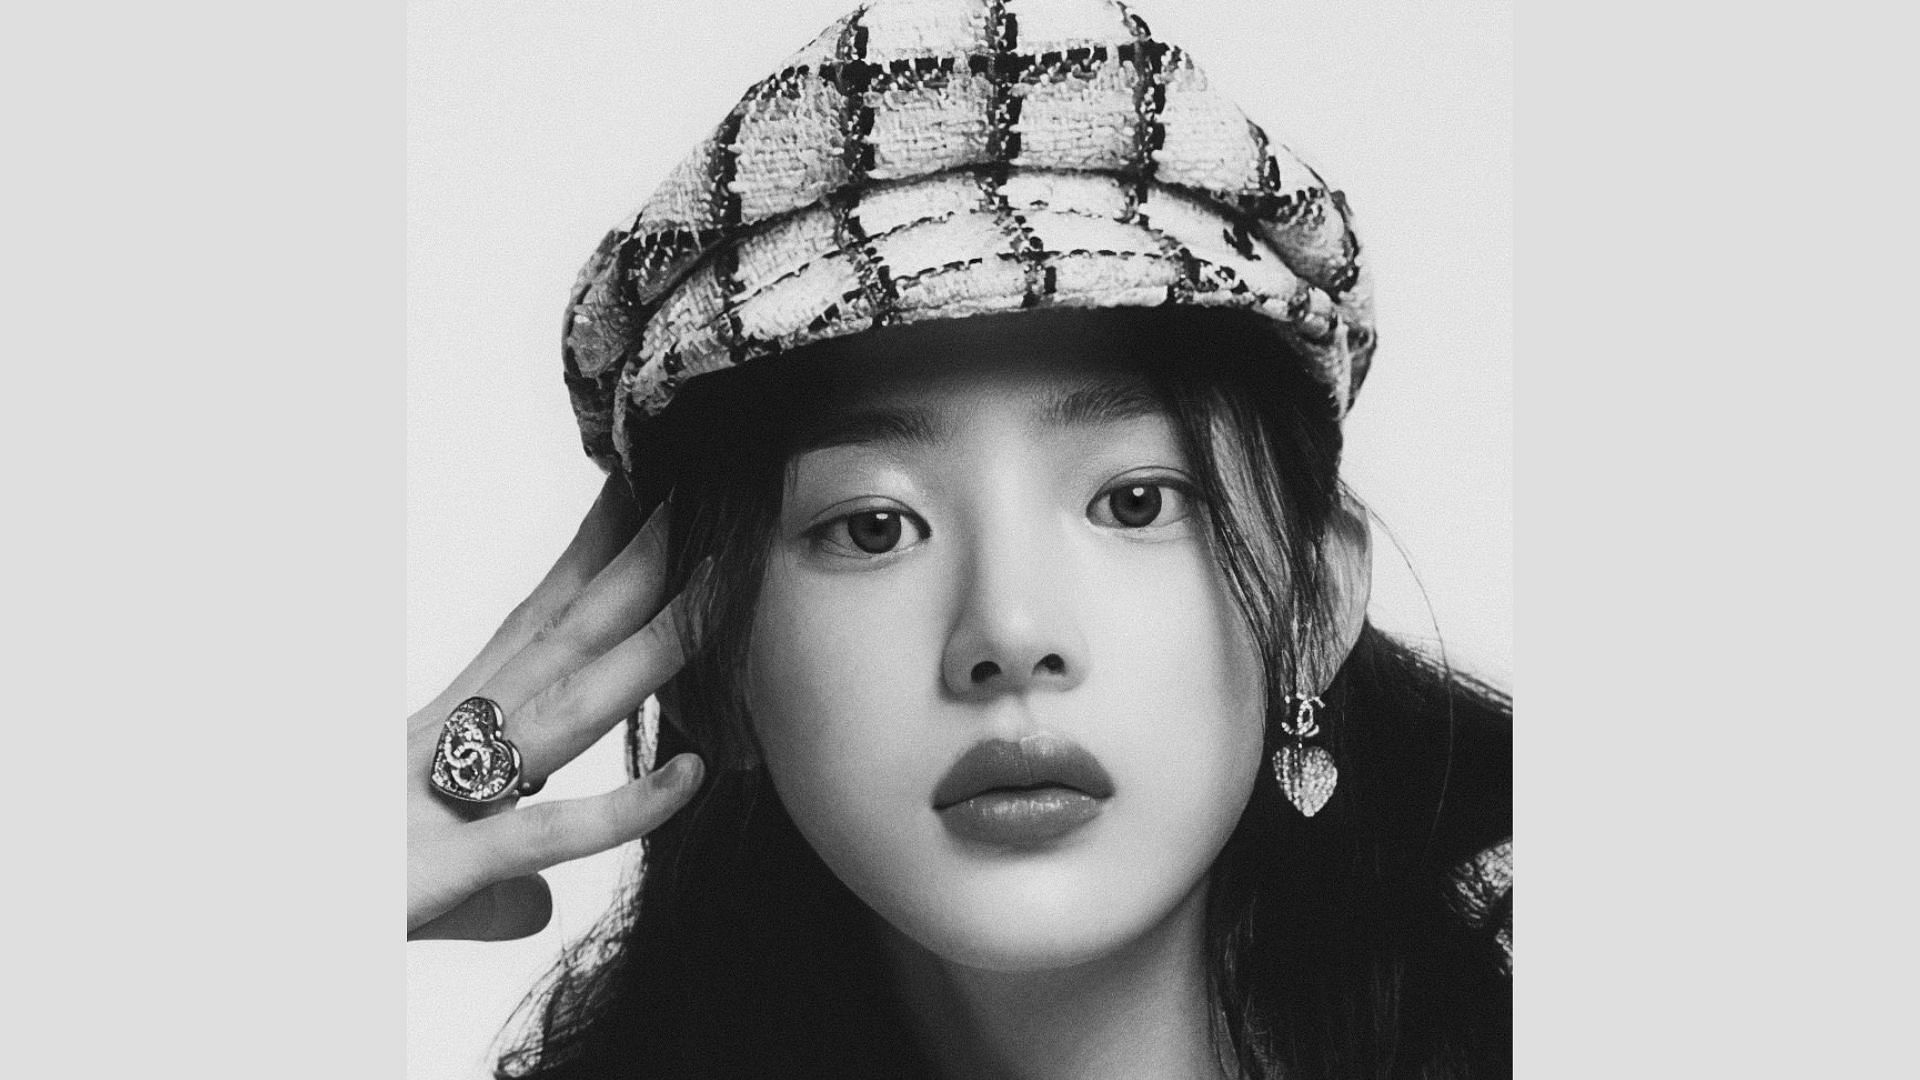 Minji of NewJeans is appointed newest Chanel Korea ambassador